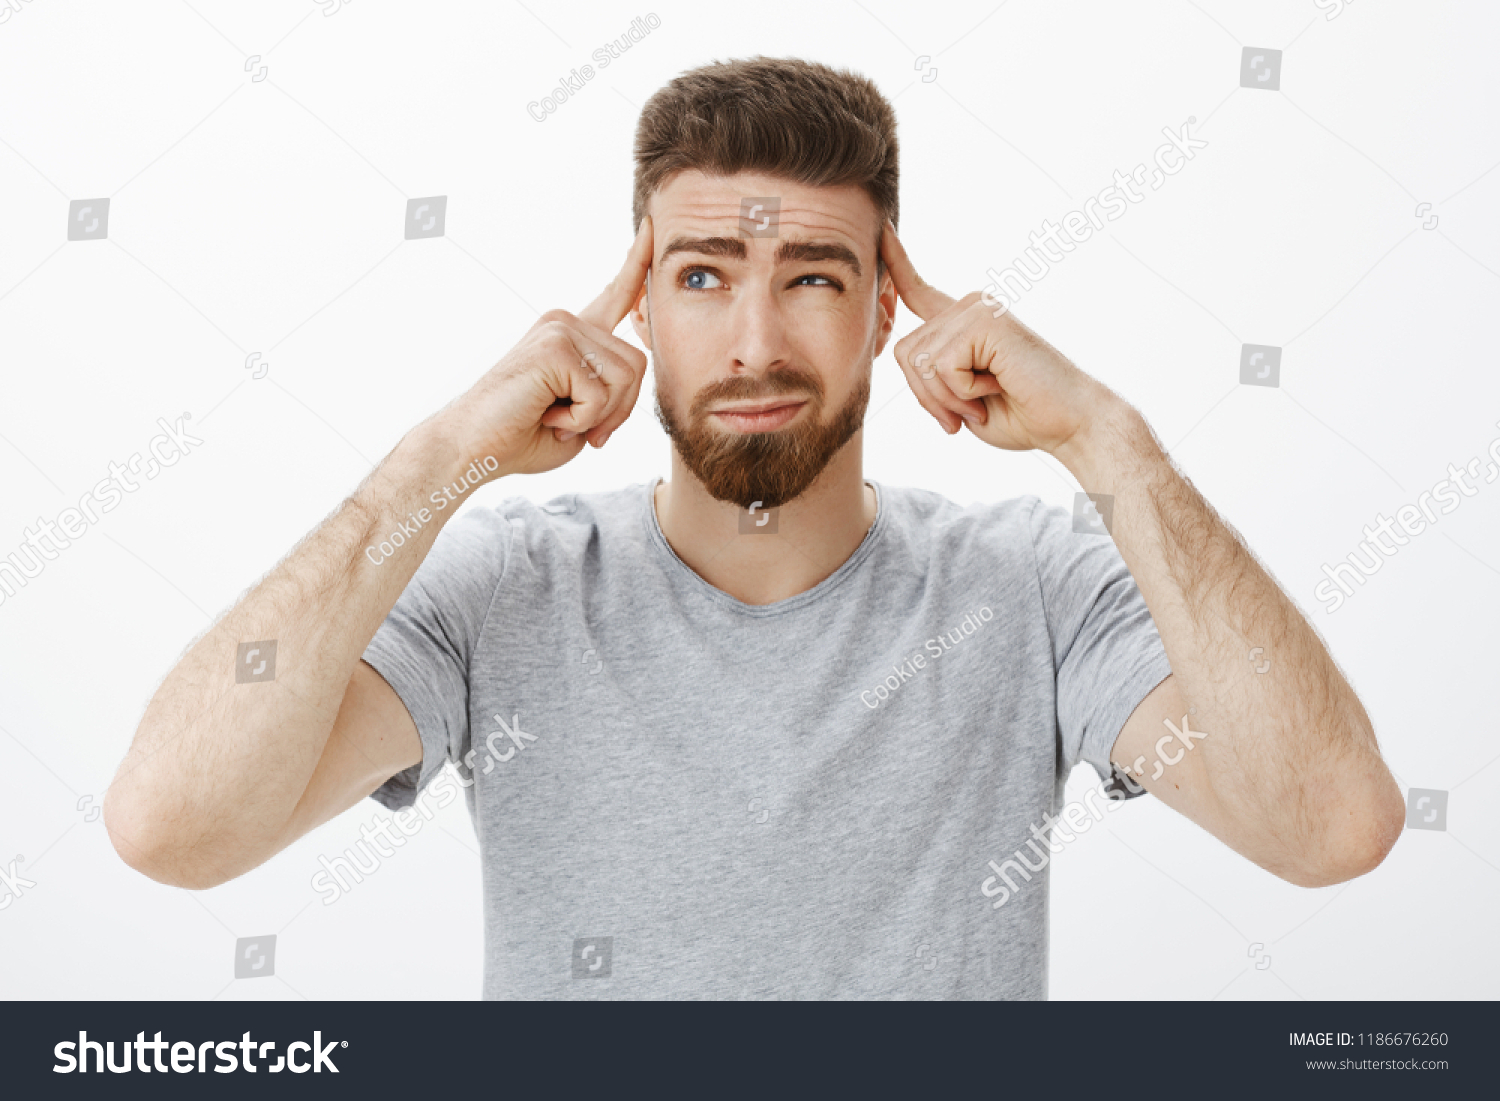 Guy trying focus, think up new plan. Determined, thoughtful handsome charismatic man with beard and blue eyes squinting, smirking holding fingers on temples focusing on importrant game, concentrating #1186676260